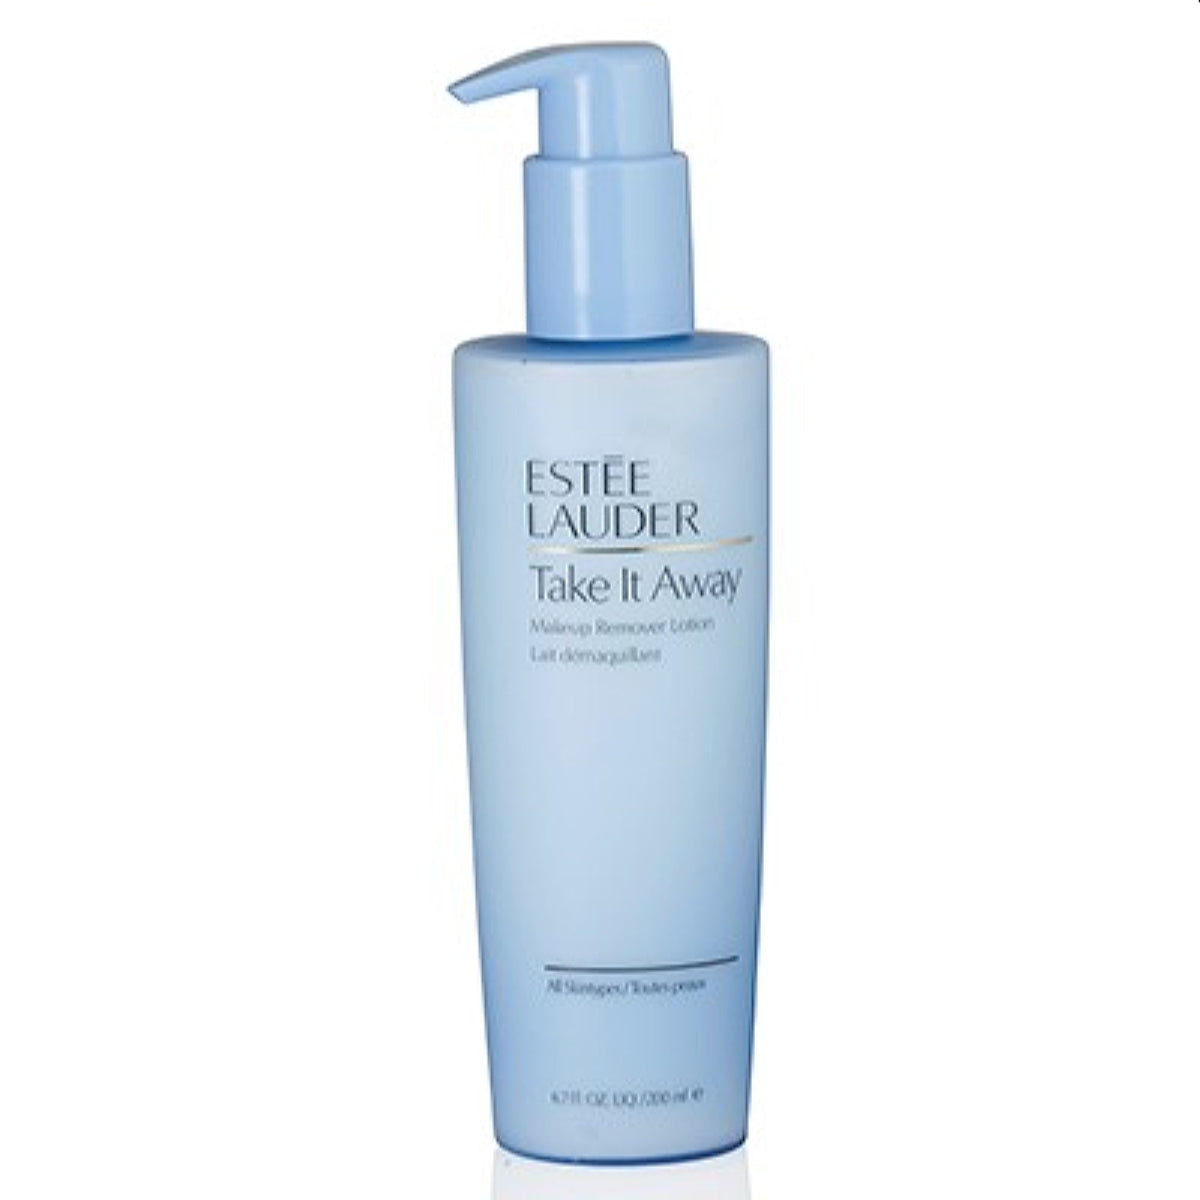 Estee Lauder Take It Away Cleanser Makeup Remover Lotion 6.7 Oz (200 Ml) YCF7